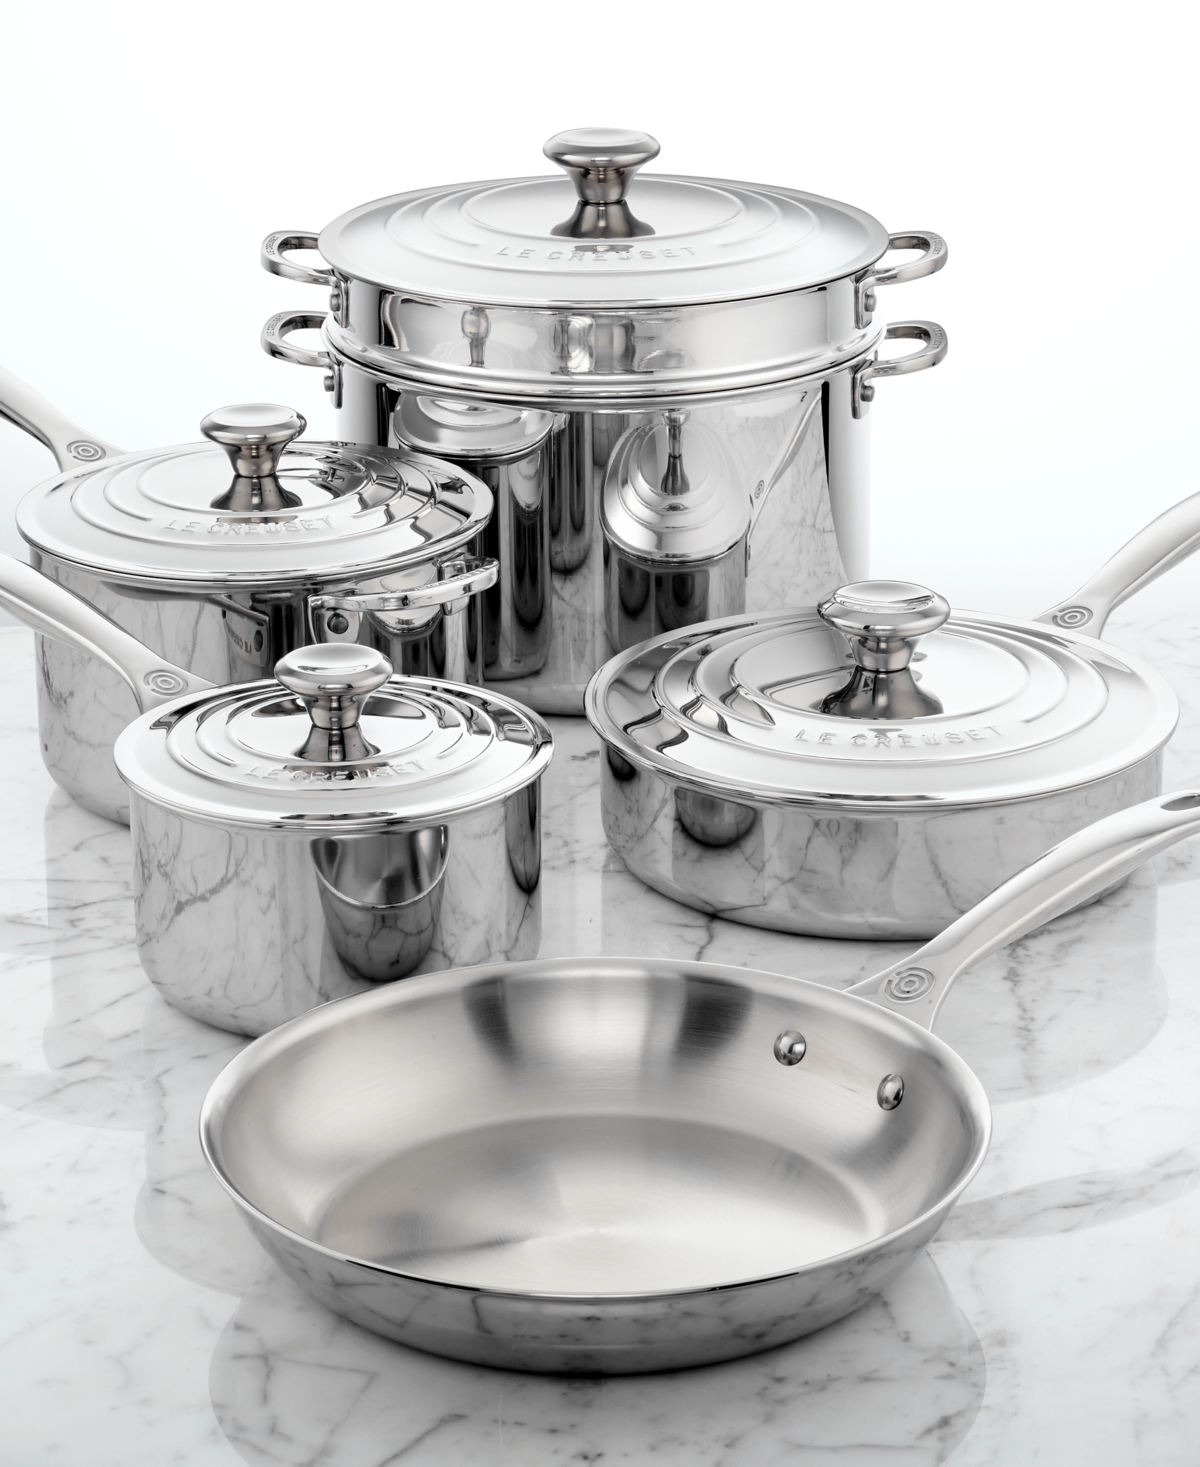 Le Creuset 10 Piece 3-ply Stainless Steel Cookware Set